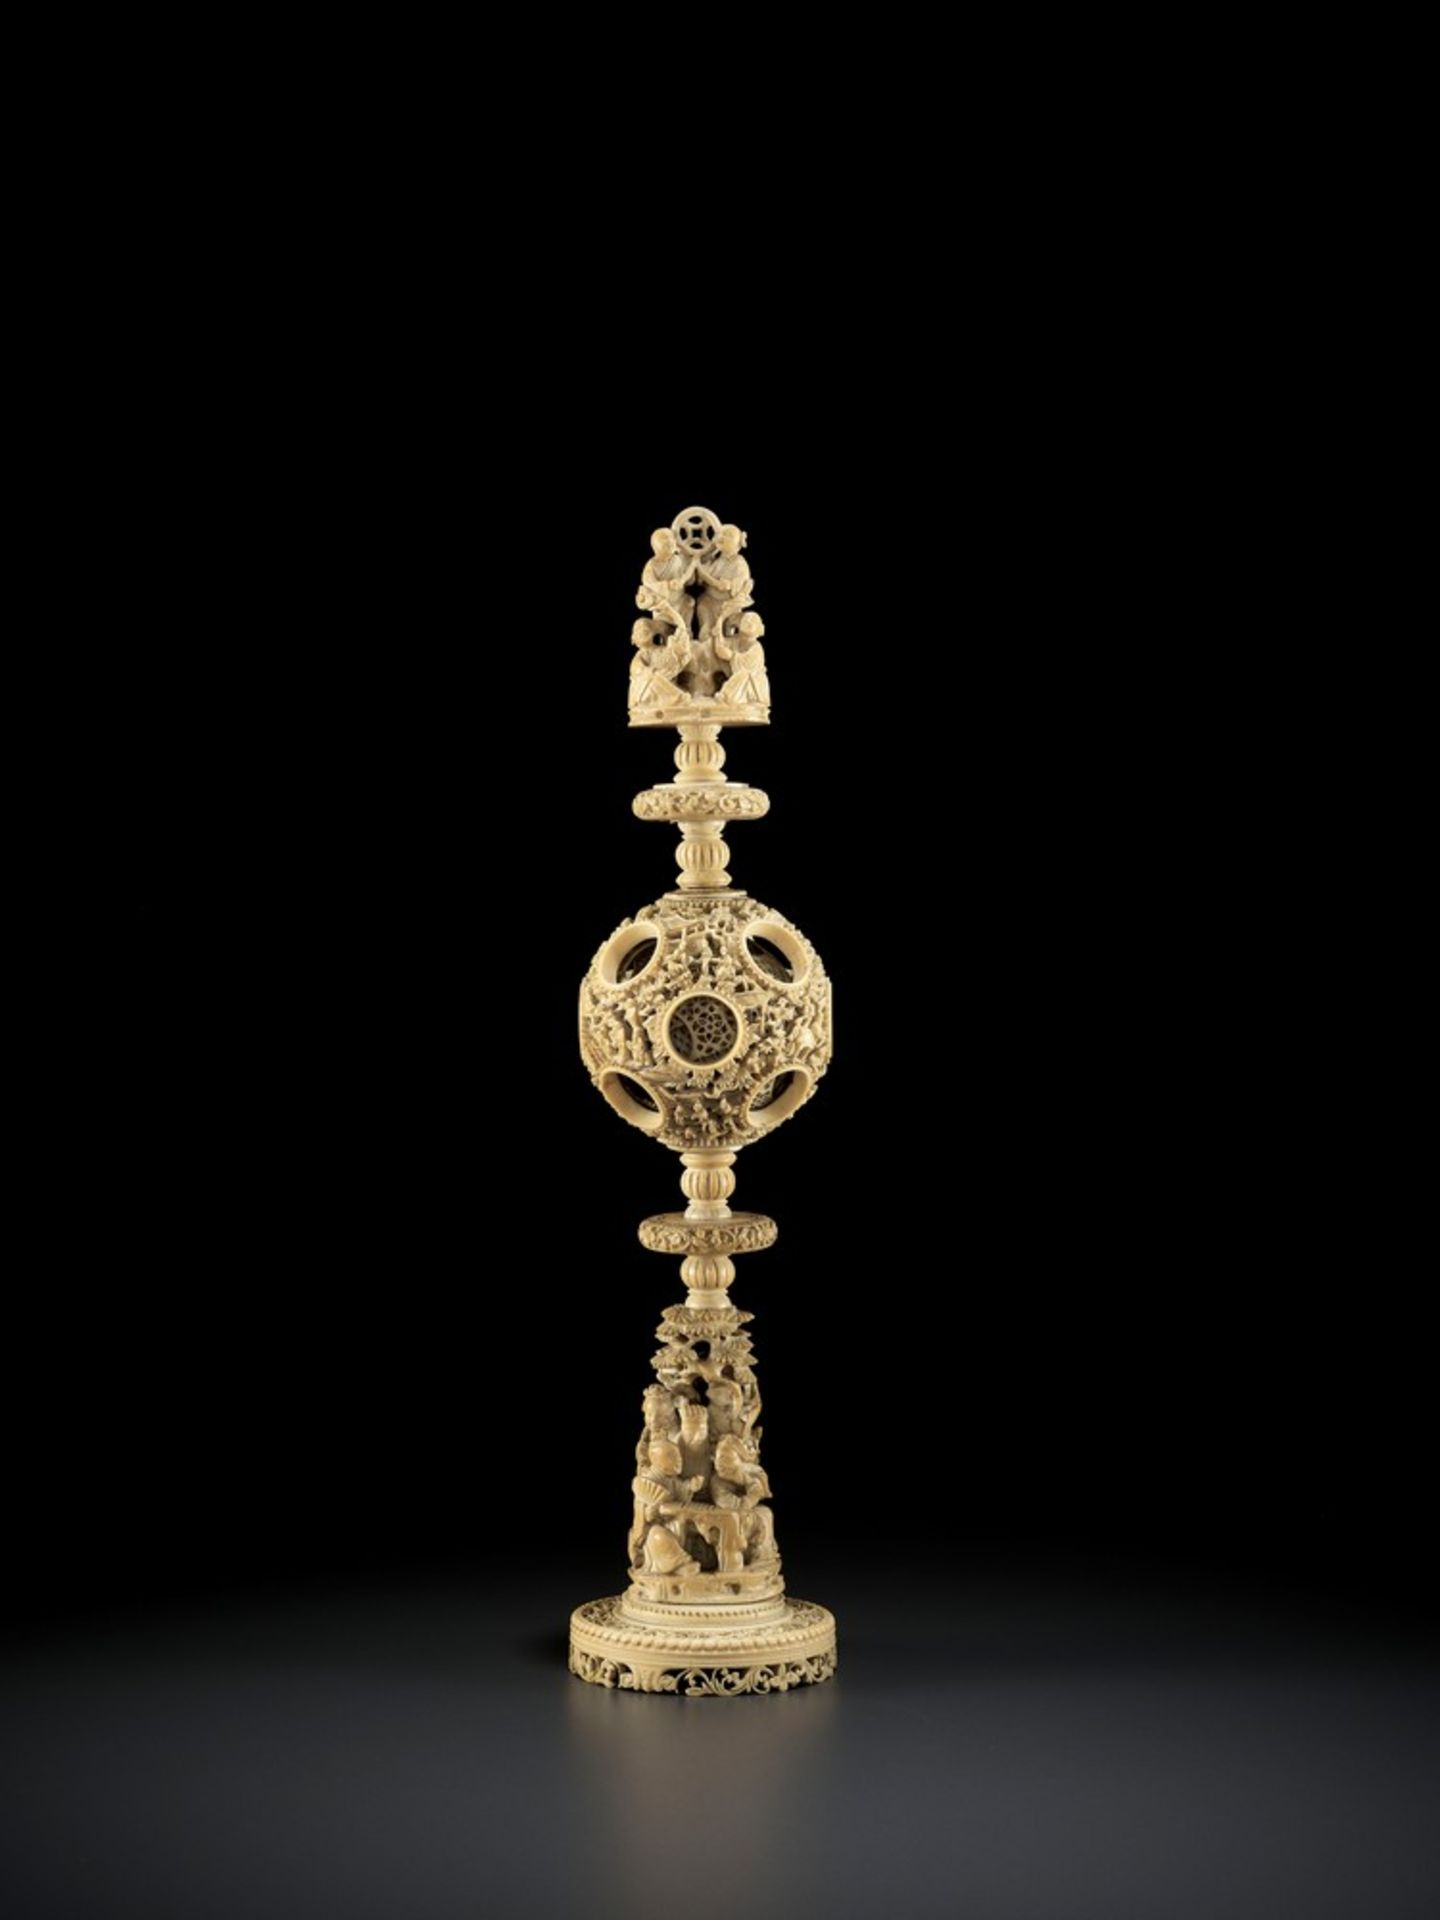 A CANTON SCHOOL 'MAGIC' IVORY BALL ON A TALL STAND, QING DYNASTY